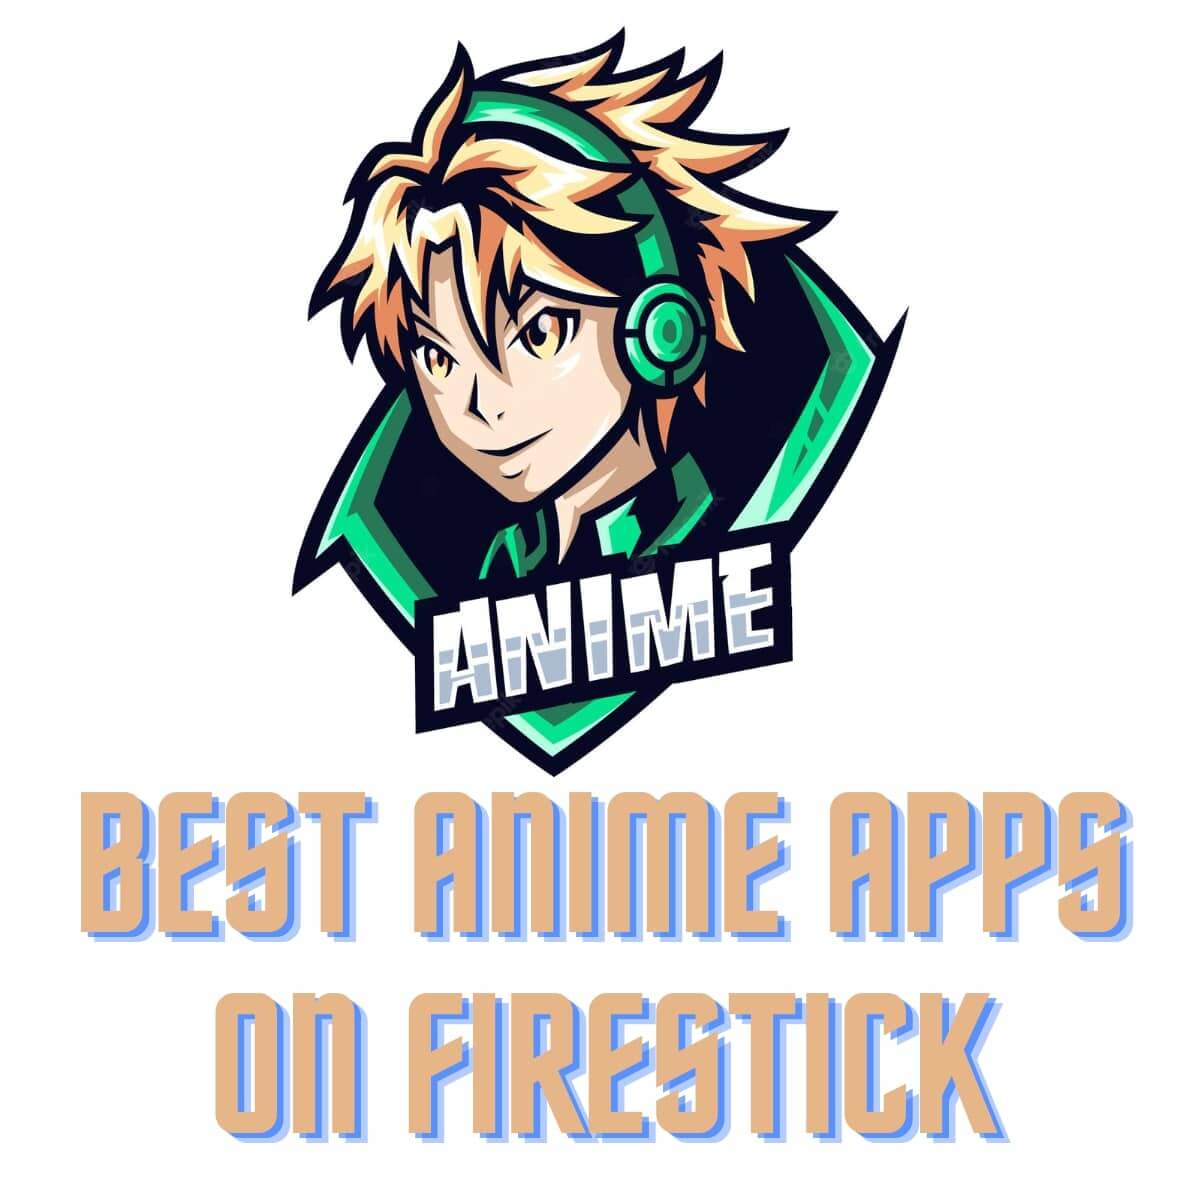 How to Install FireAnime on FireStick for Unlimited Anime - Fire Stick  Tricks